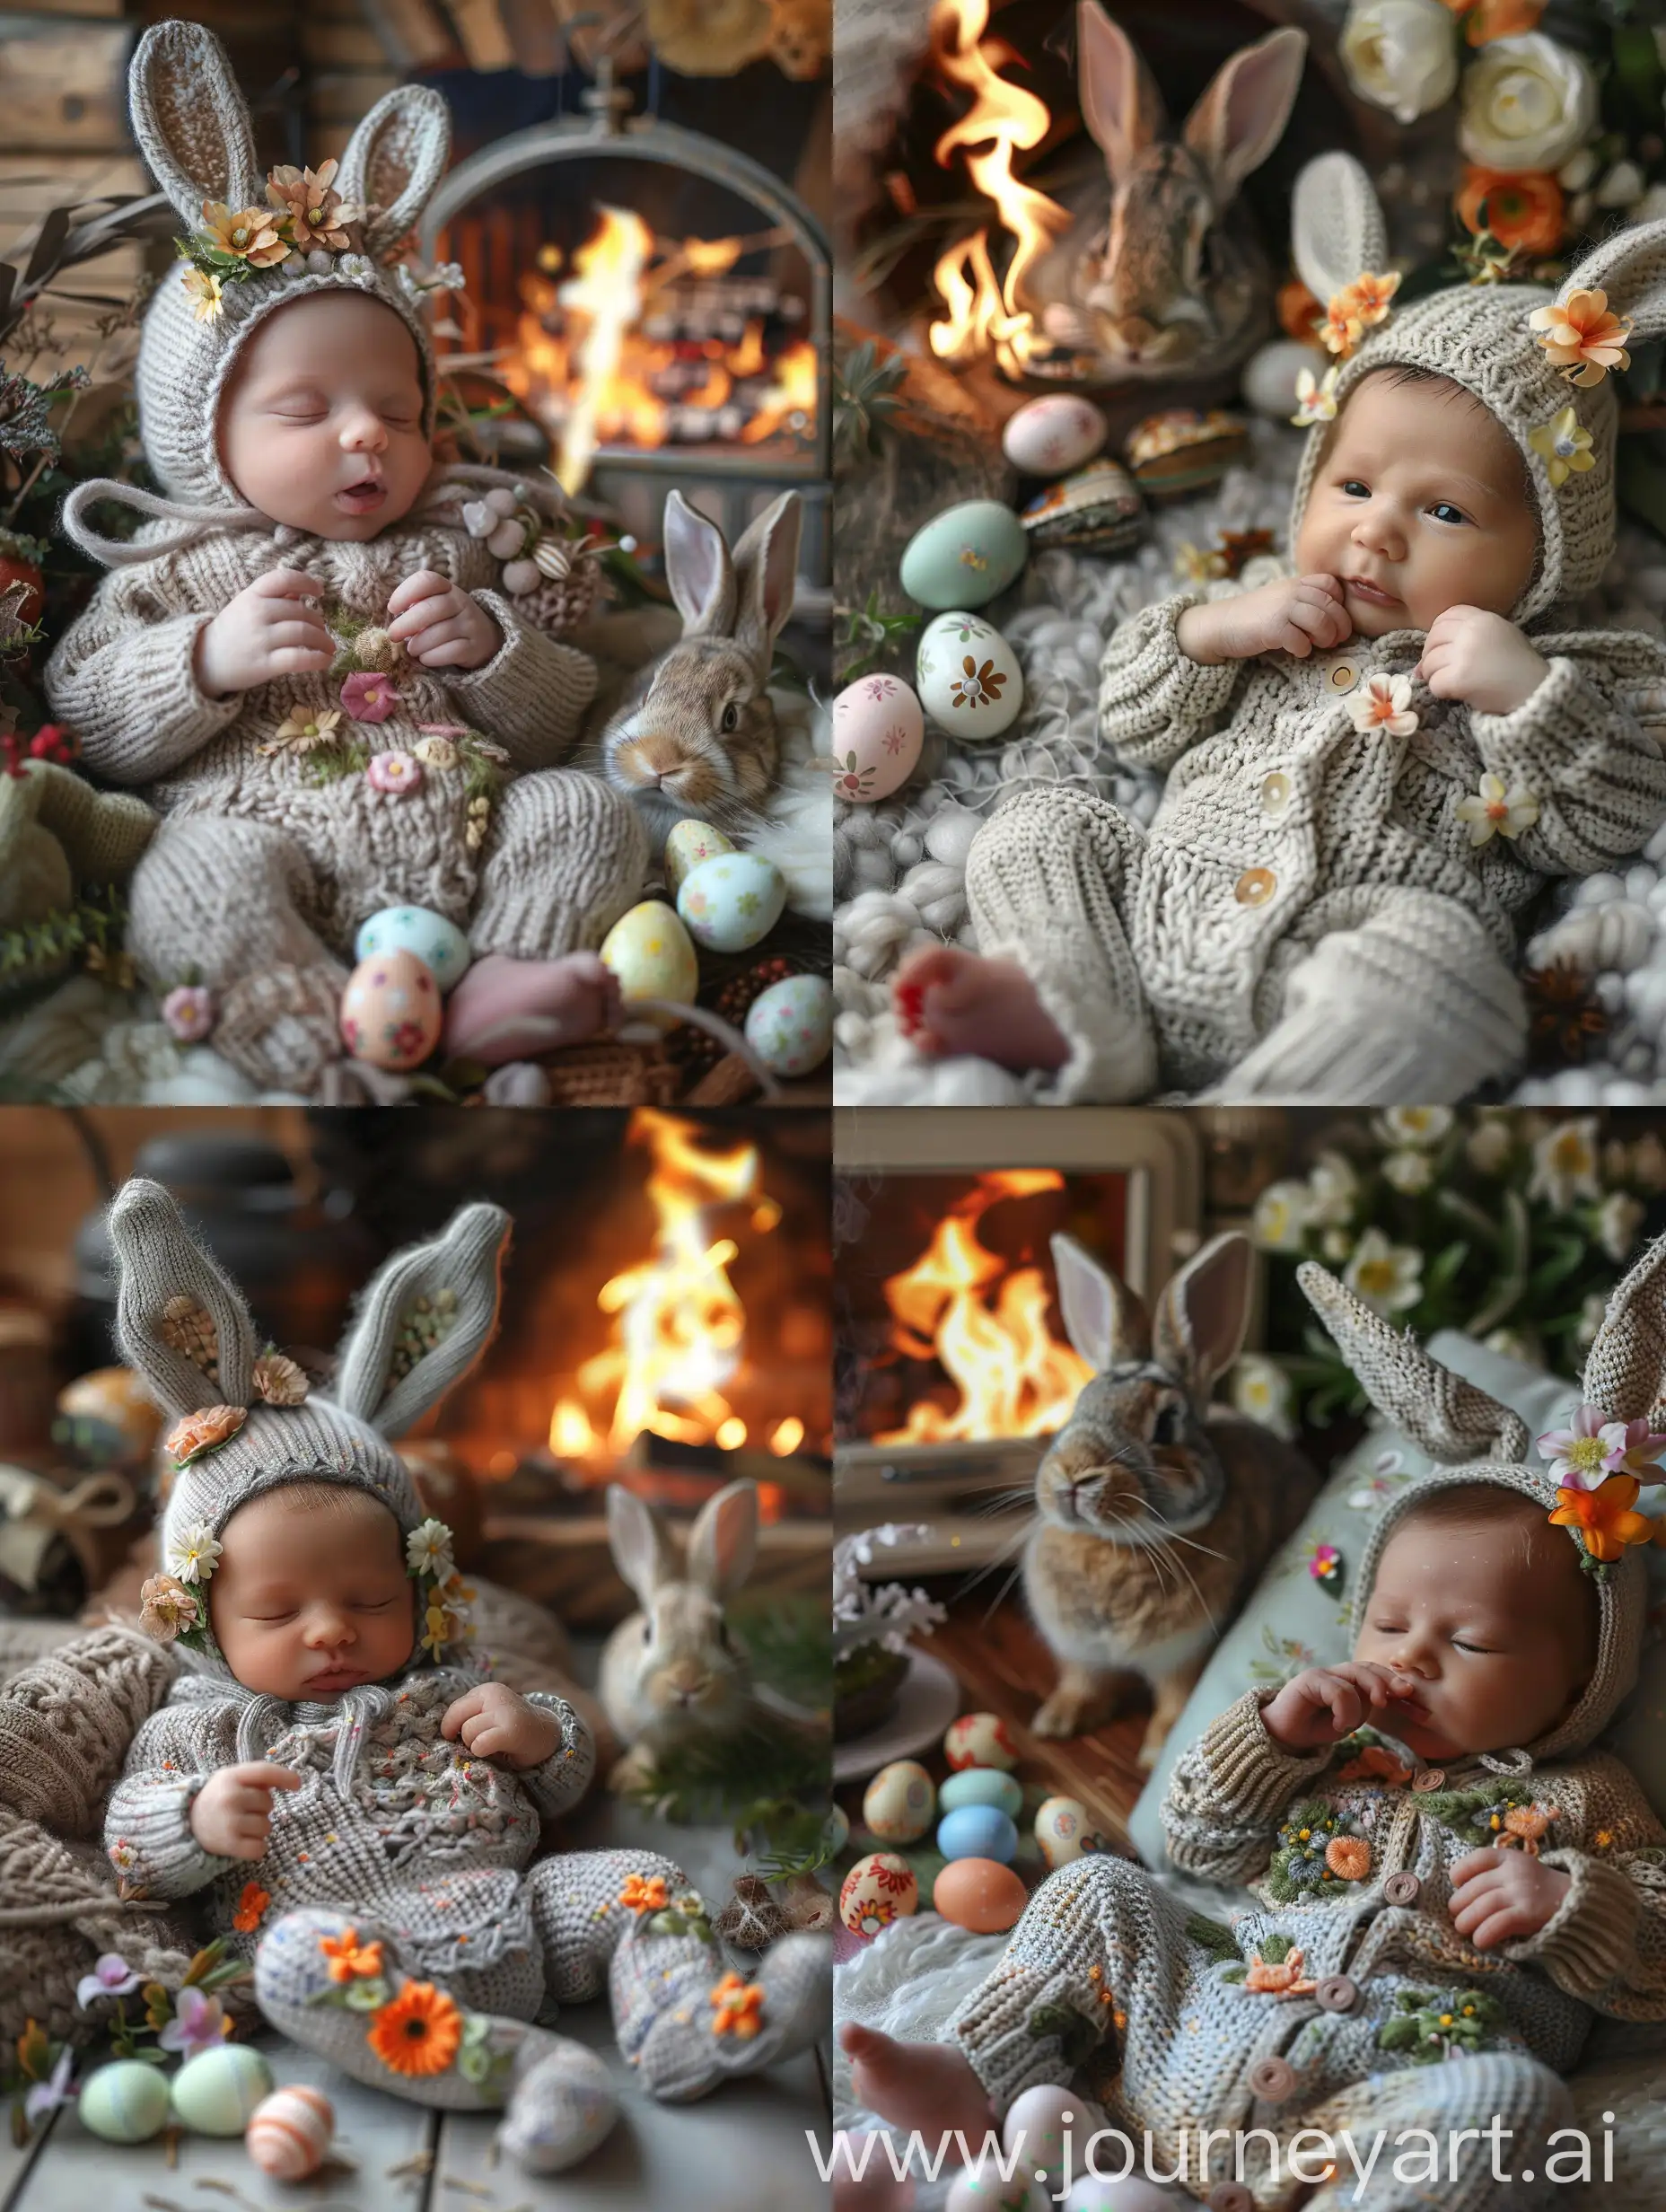 Adorable-Baby-in-Bunny-Suit-with-Easter-Eggs-and-Rabbit-in-Hyperrealistic-Scene